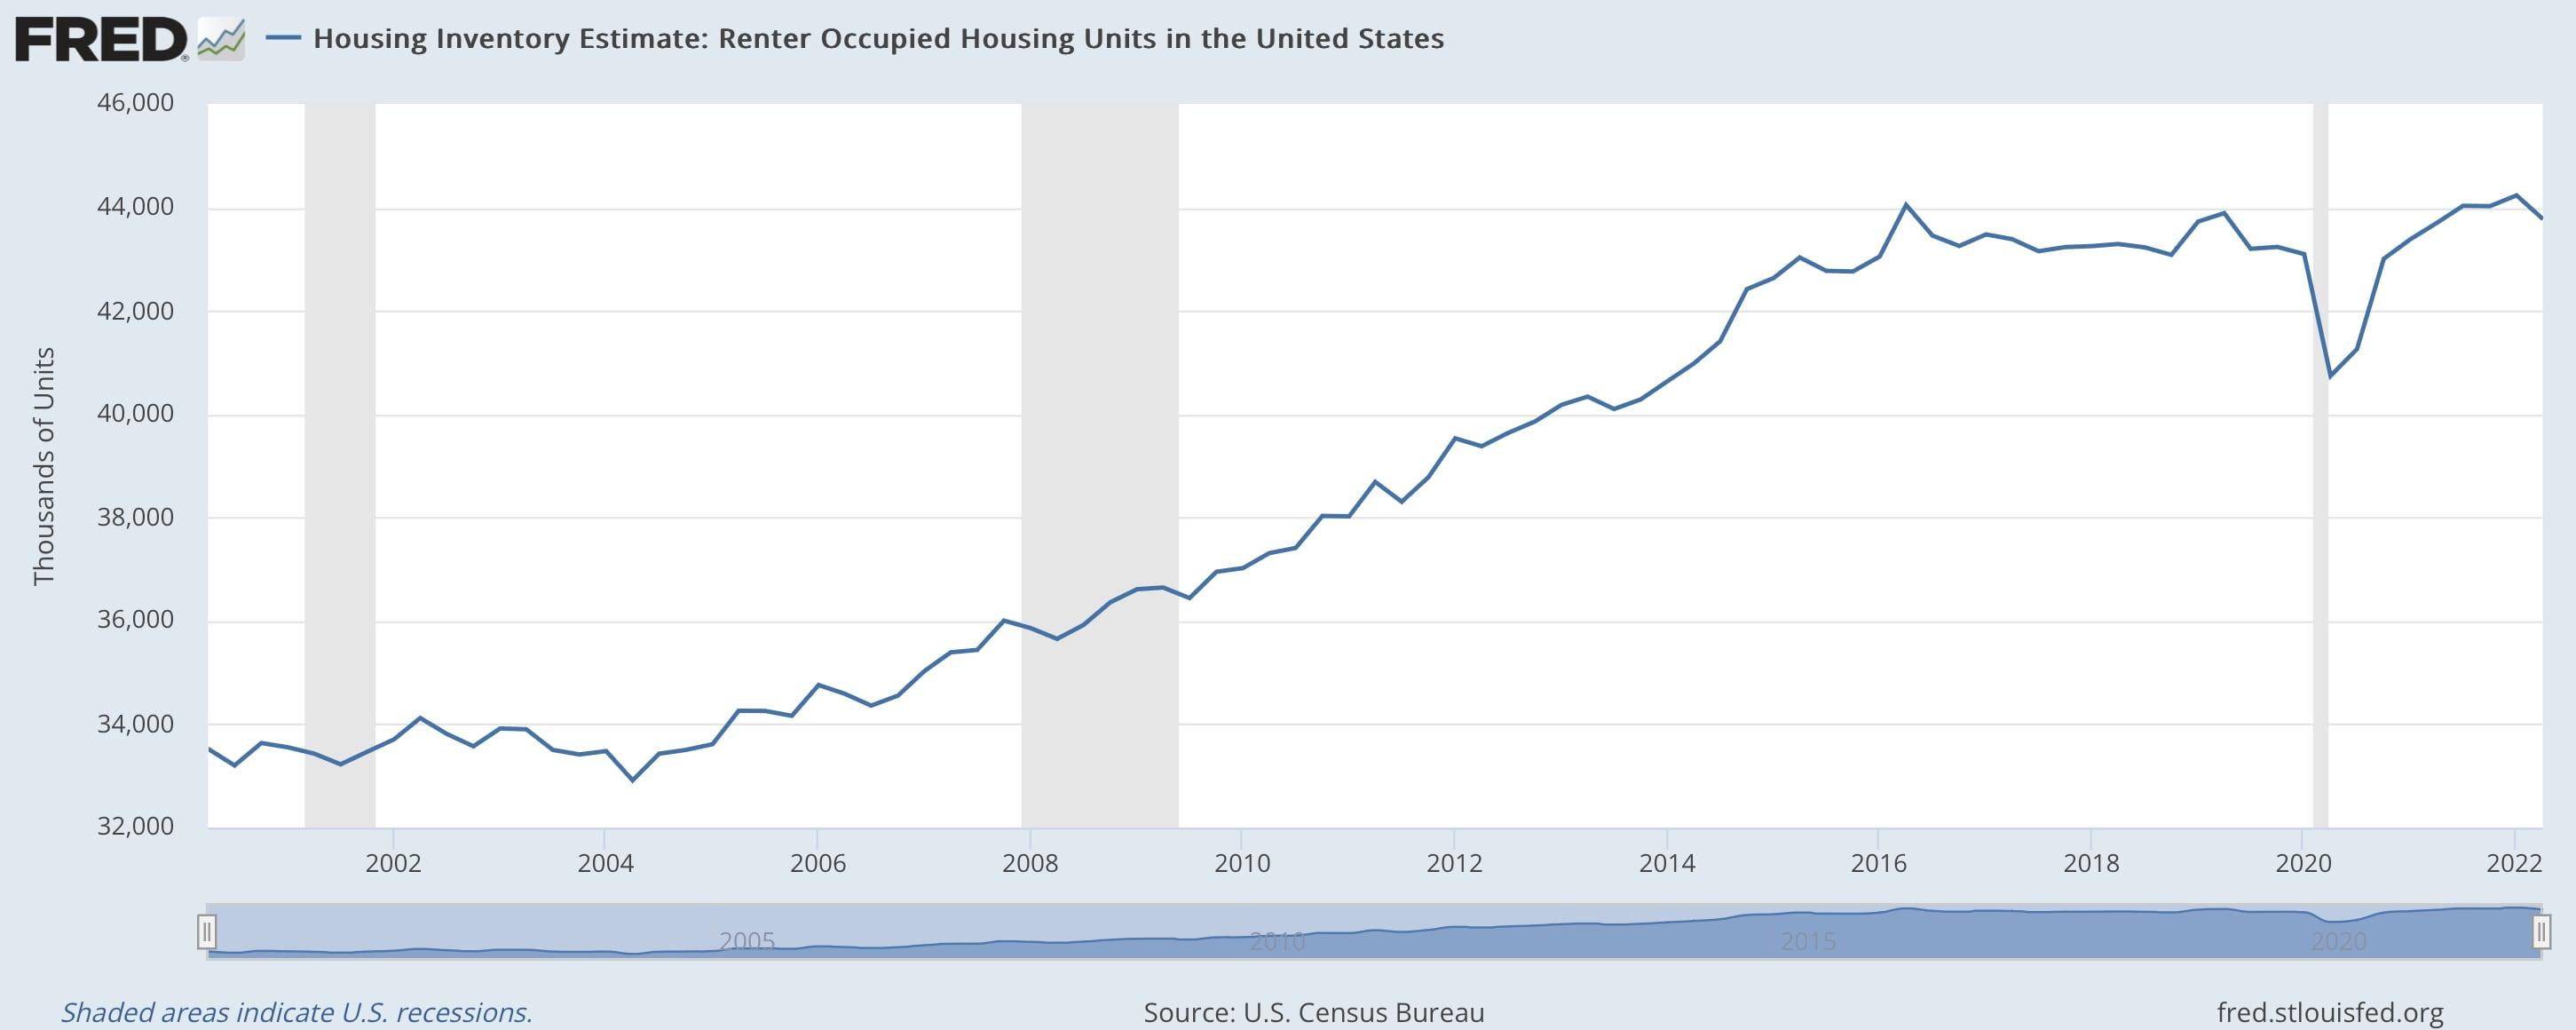 Chart of Housing Inventory Estimate: Renter Occupied Housing Units in the United States